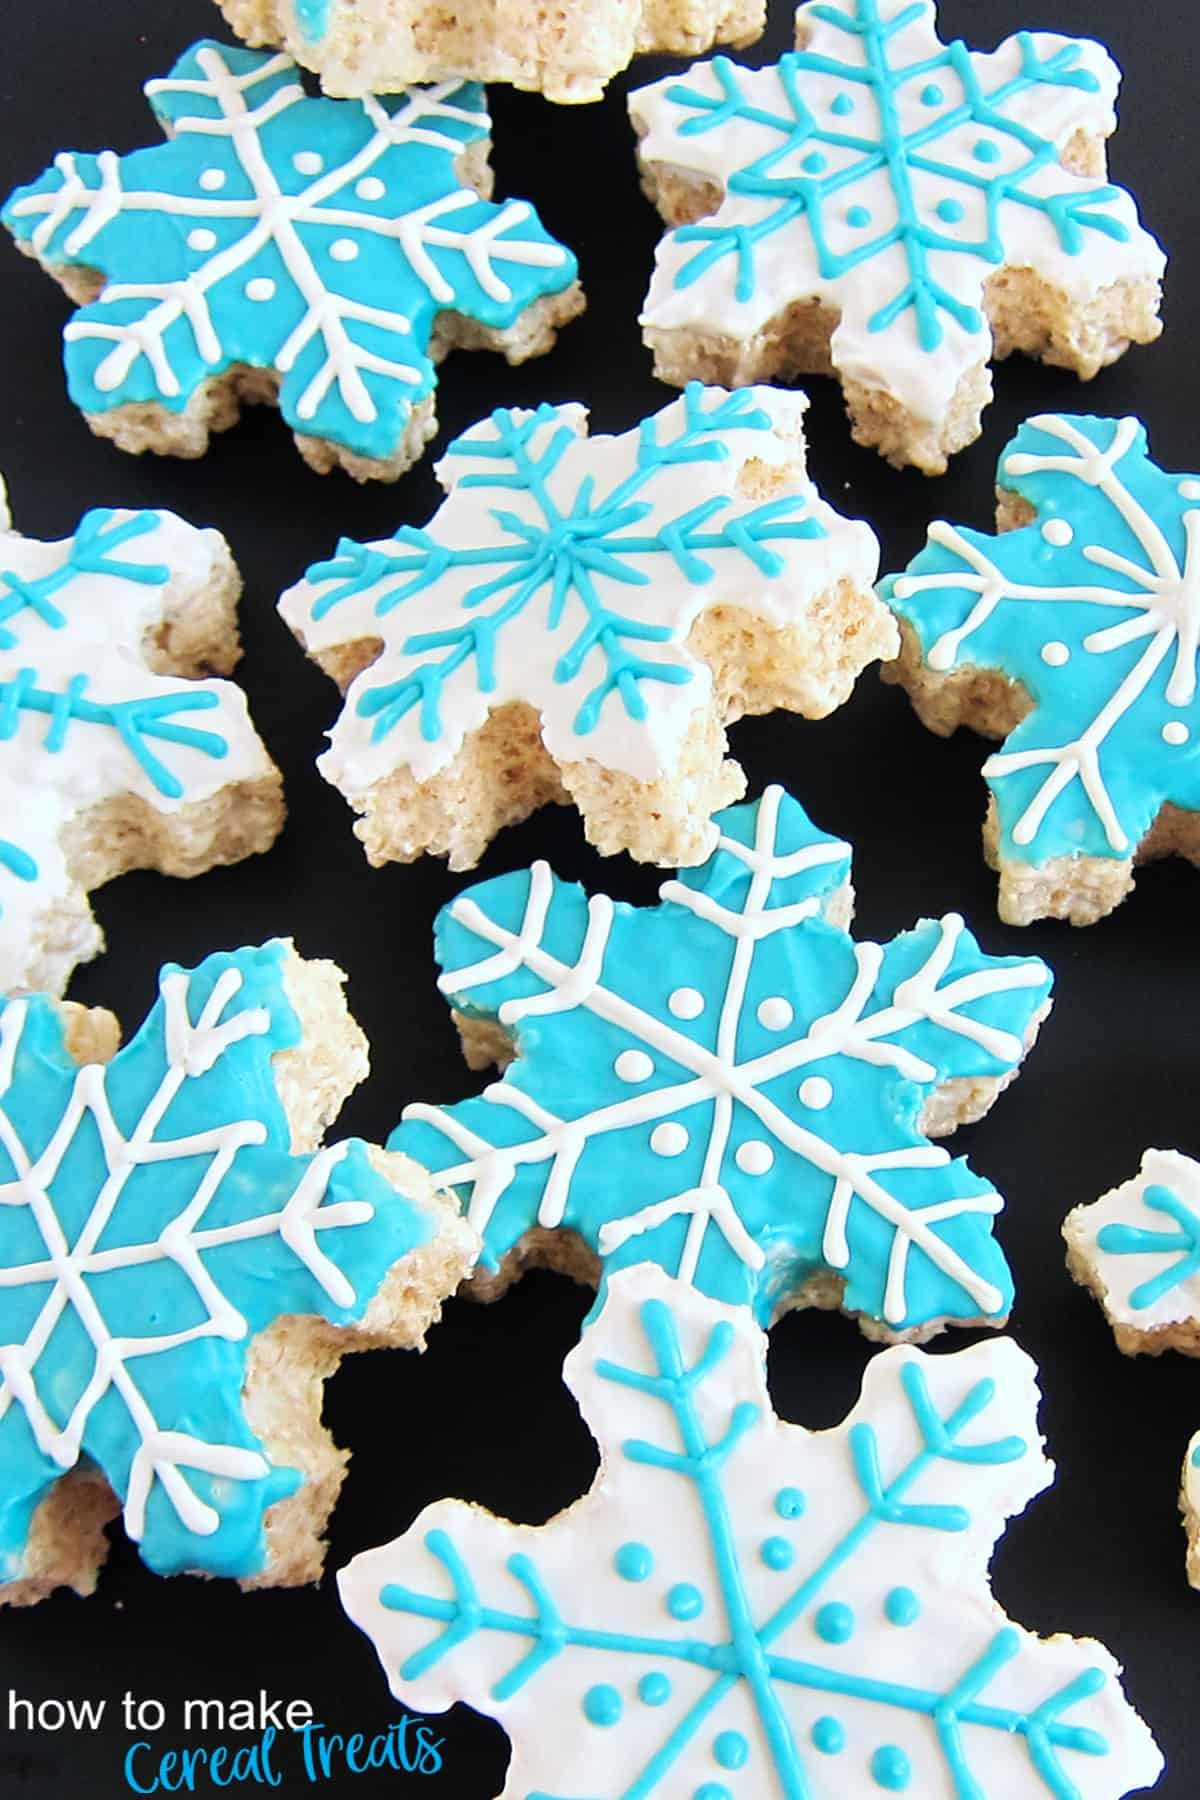 white and blue Rice Krispie Treat snowflakes covered in white chocolate.